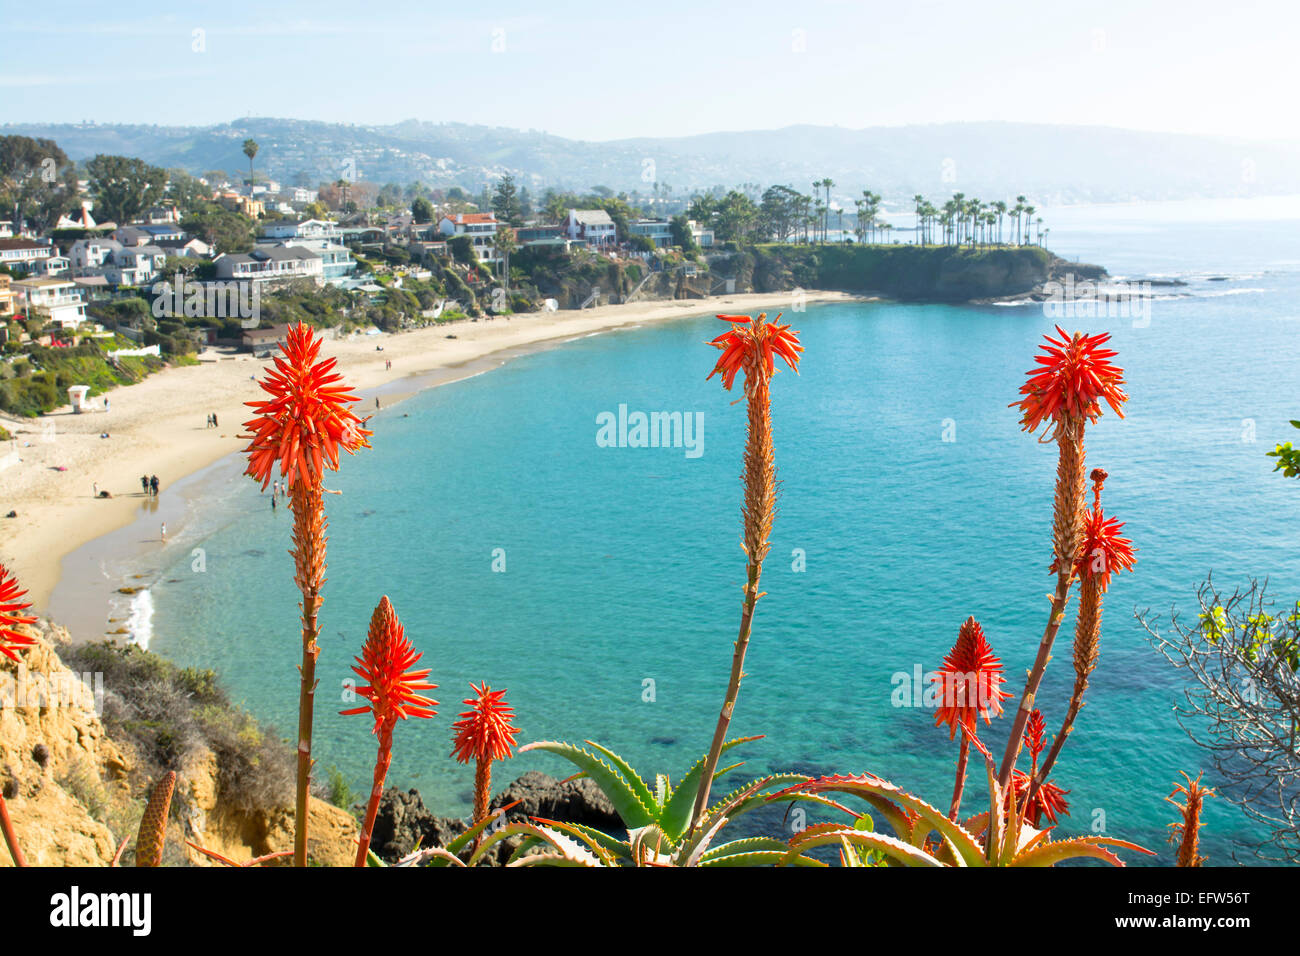 Bright orange Aloe Vera cactus blooms framed against a beautiful beach front cove with turquoise water in Laguna Beach Stock Photo